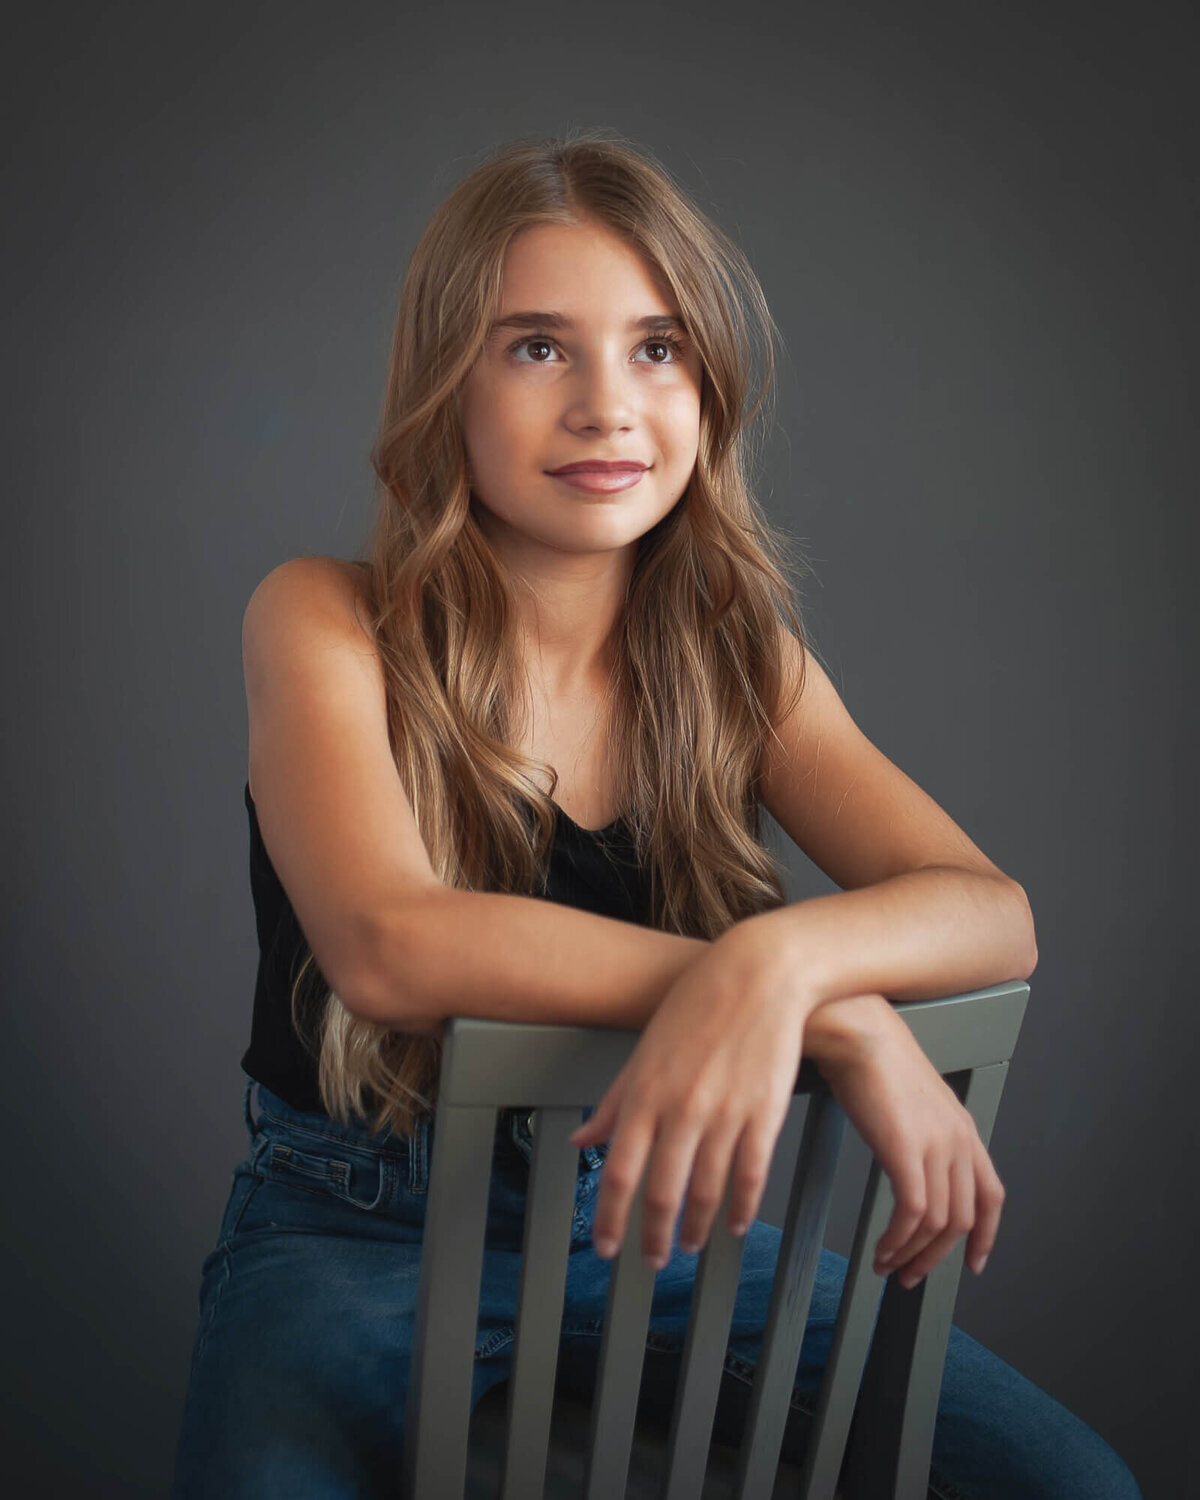 beautiful studio portrait of ten year old sitting backwards on a chair eyes looking up, grey background